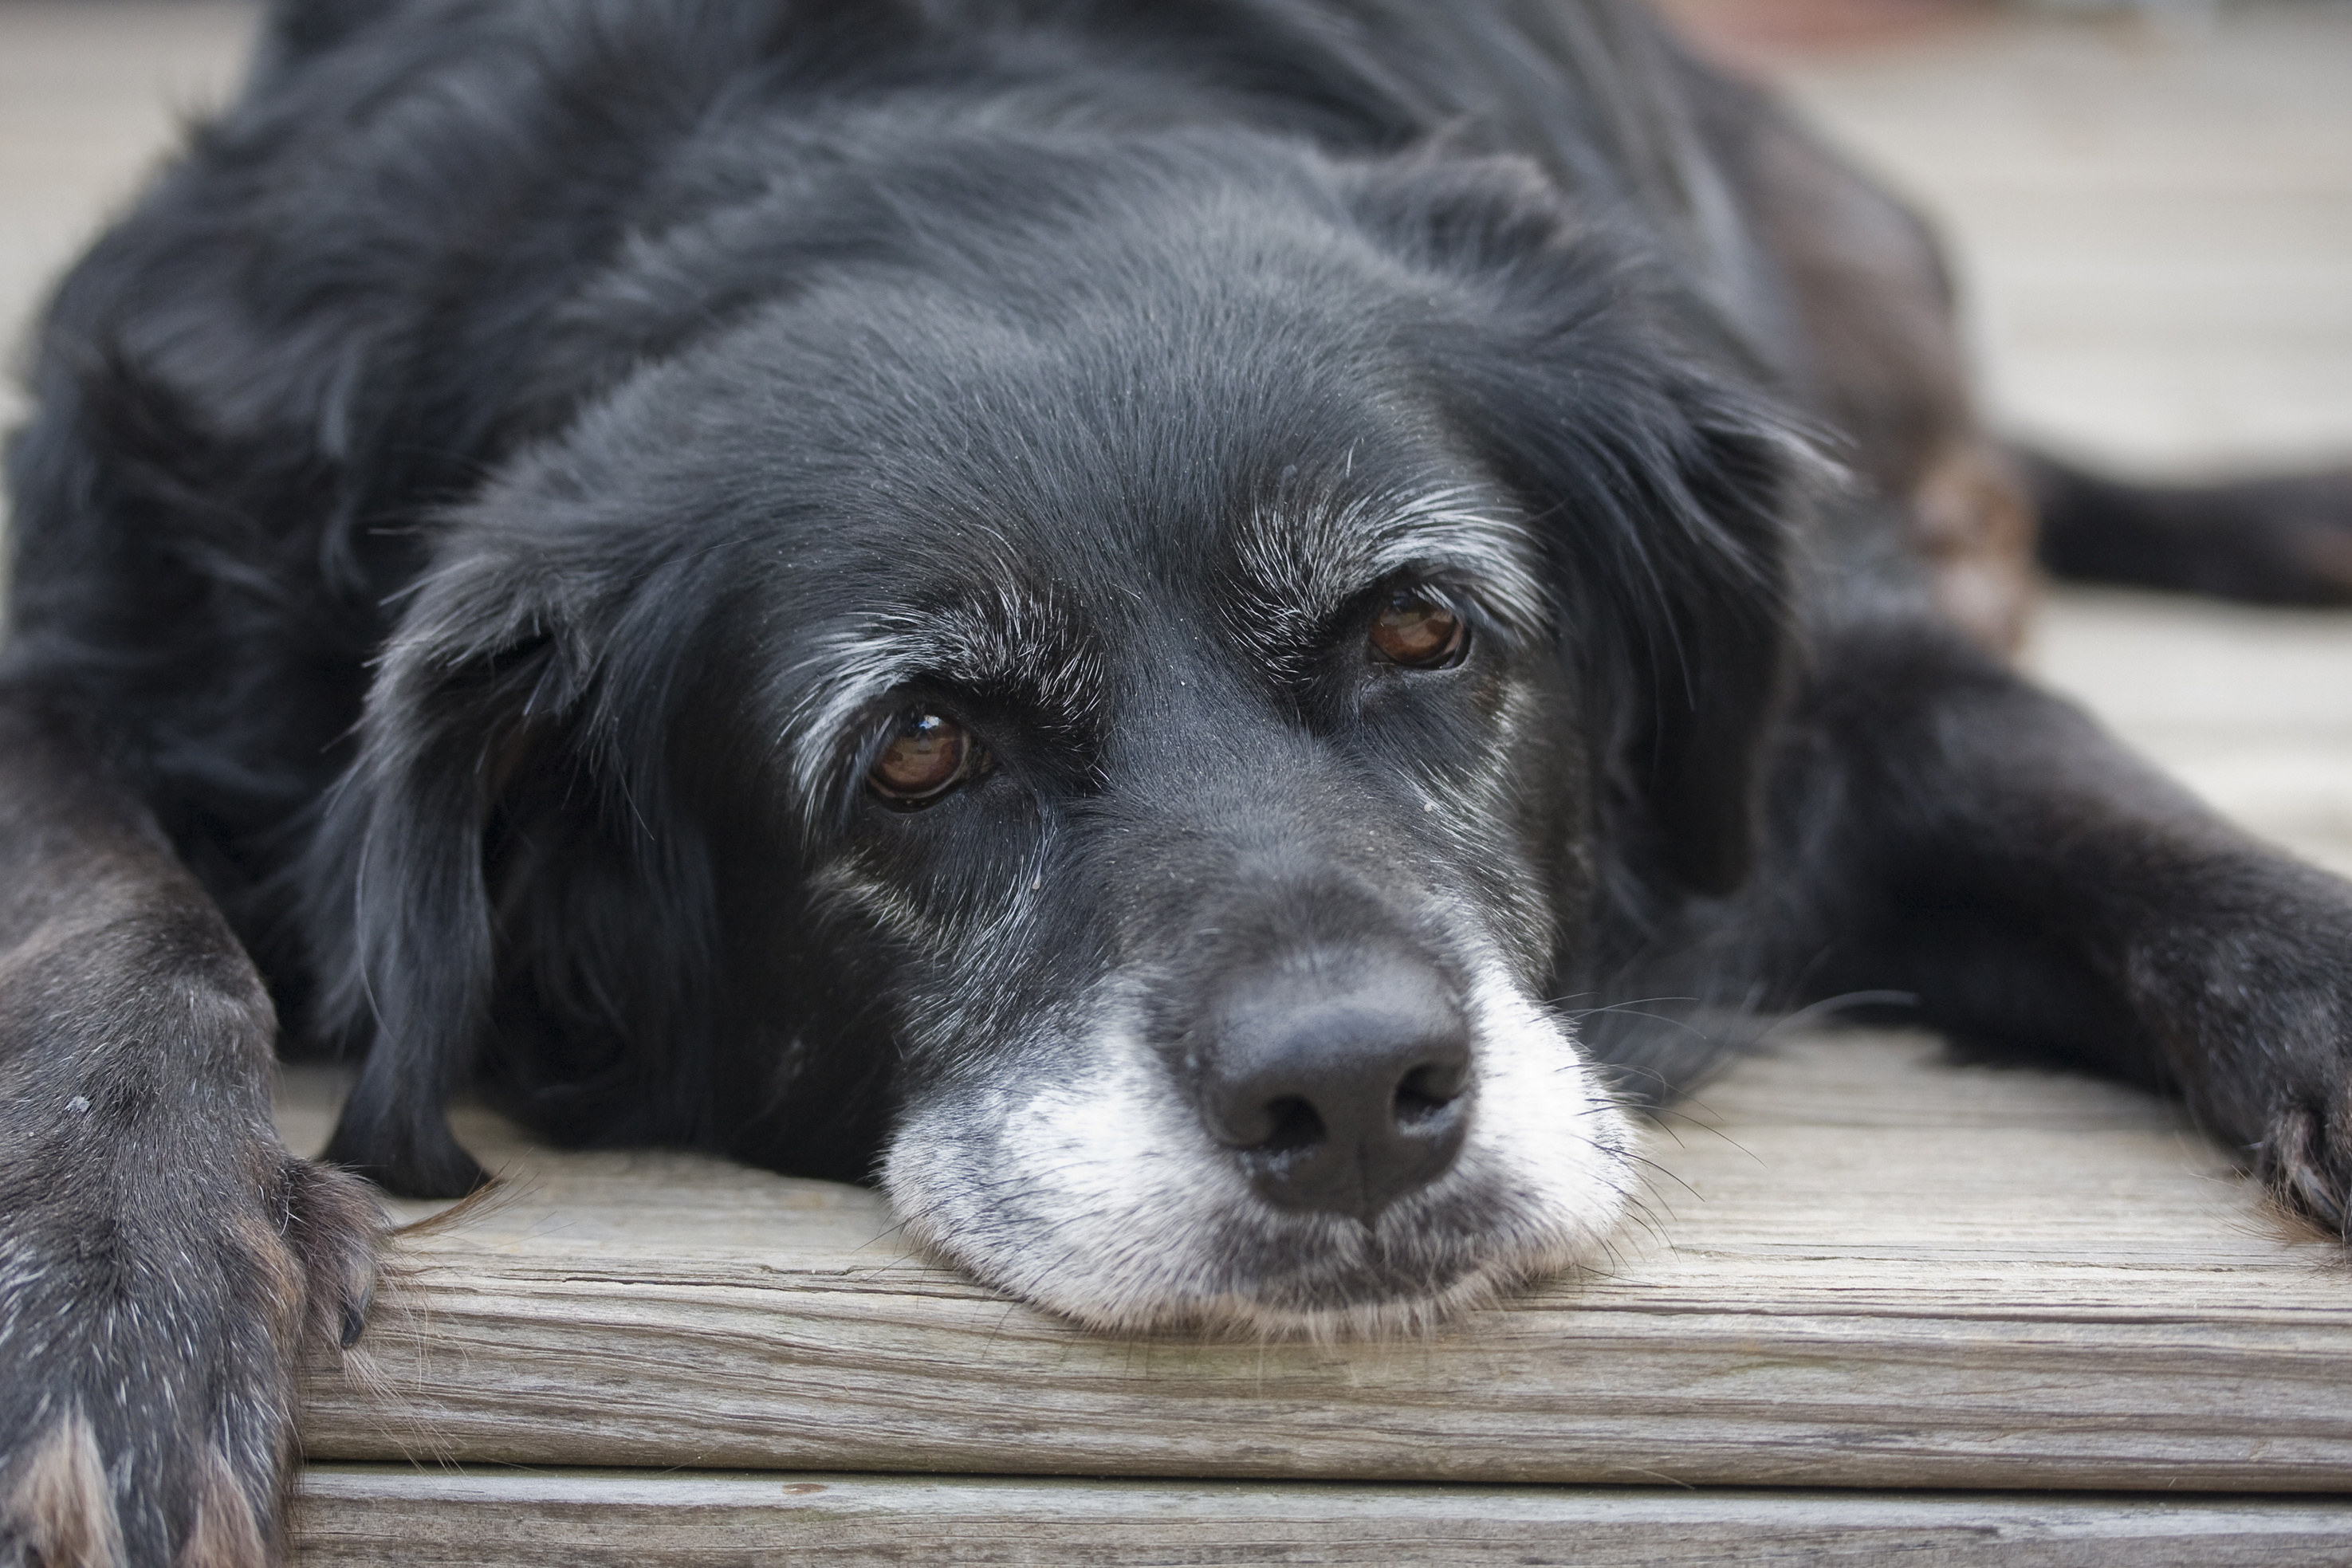 Older Dogs Are Being Given To Shelters – But Shelters Are Not A ‘Home’ For Elderly Dogs